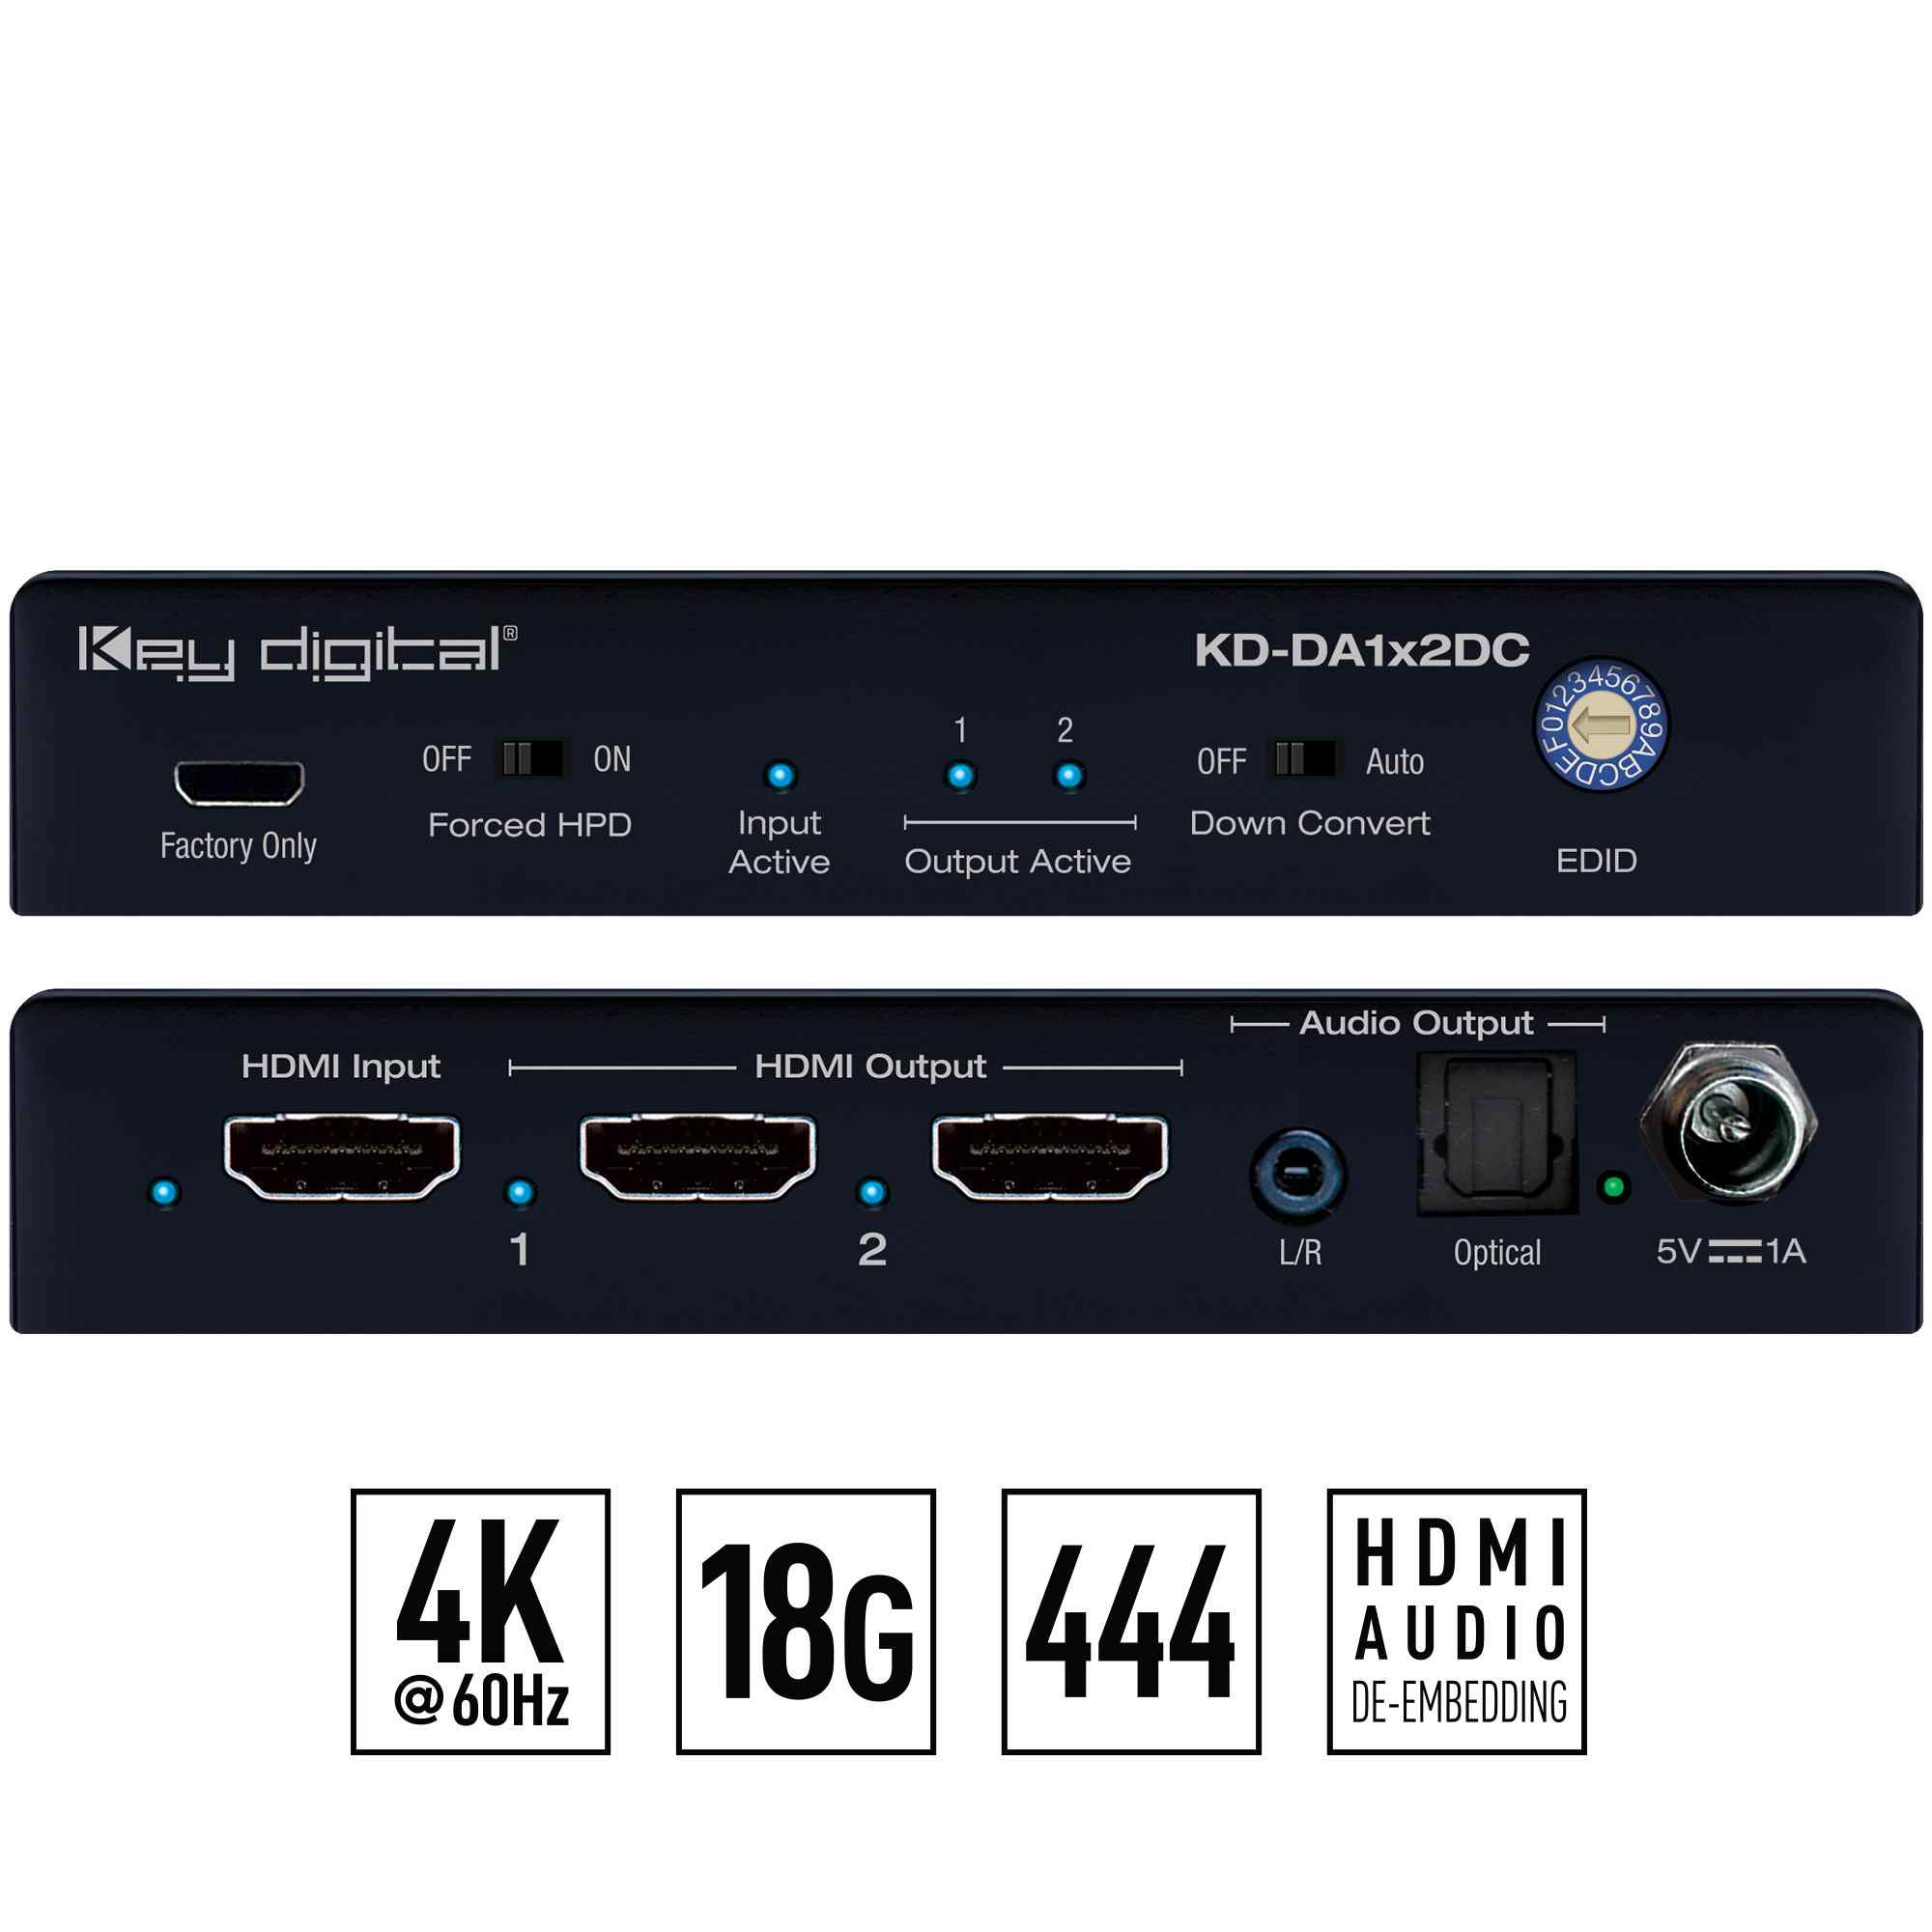 Thumbnail of Key Digital hdmi audio splitter front and rear view